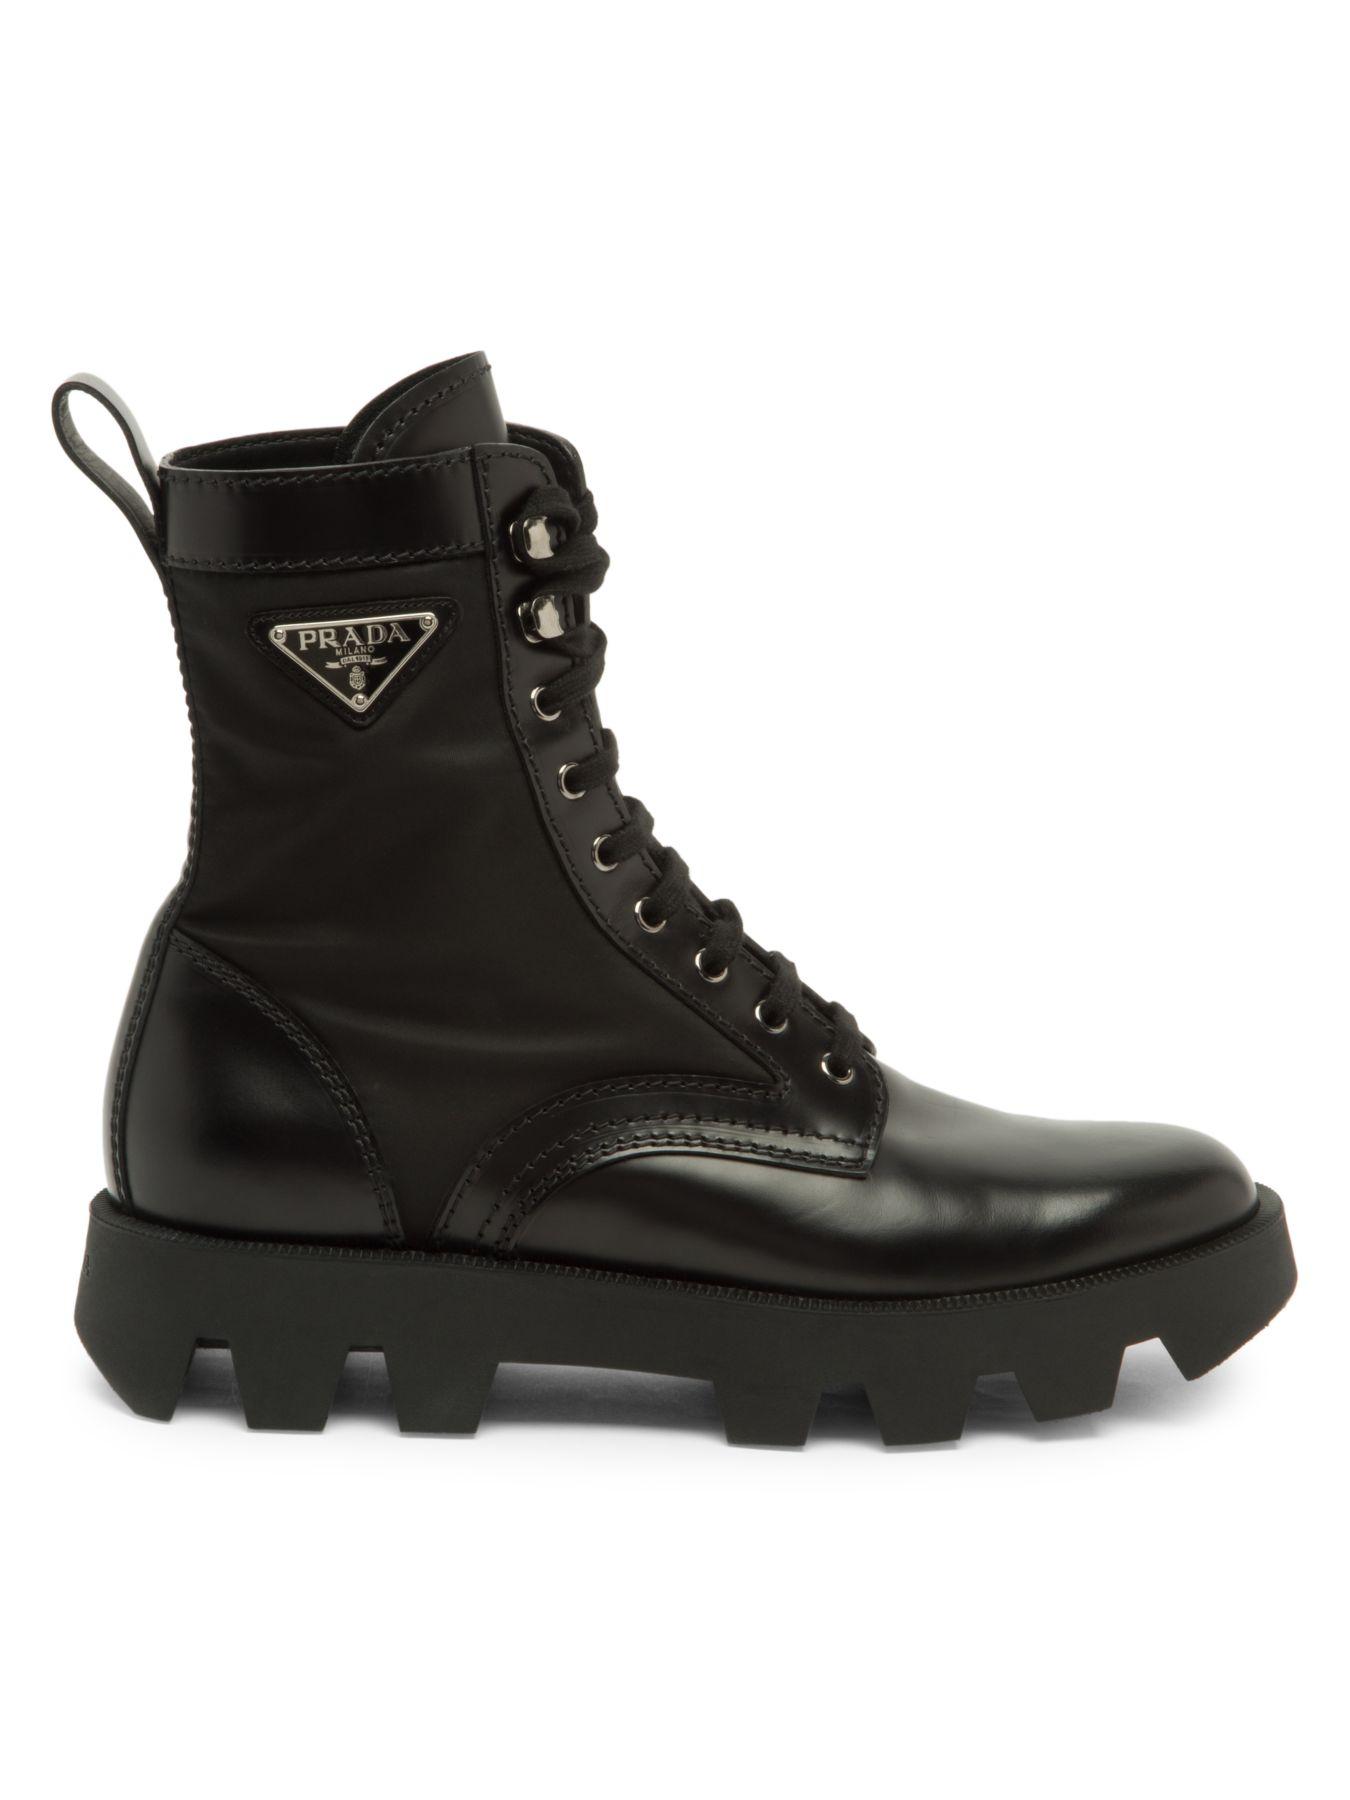 Prada Synthetic Brushed Nylon Combat Boots in Nero (Black) for Men - Lyst